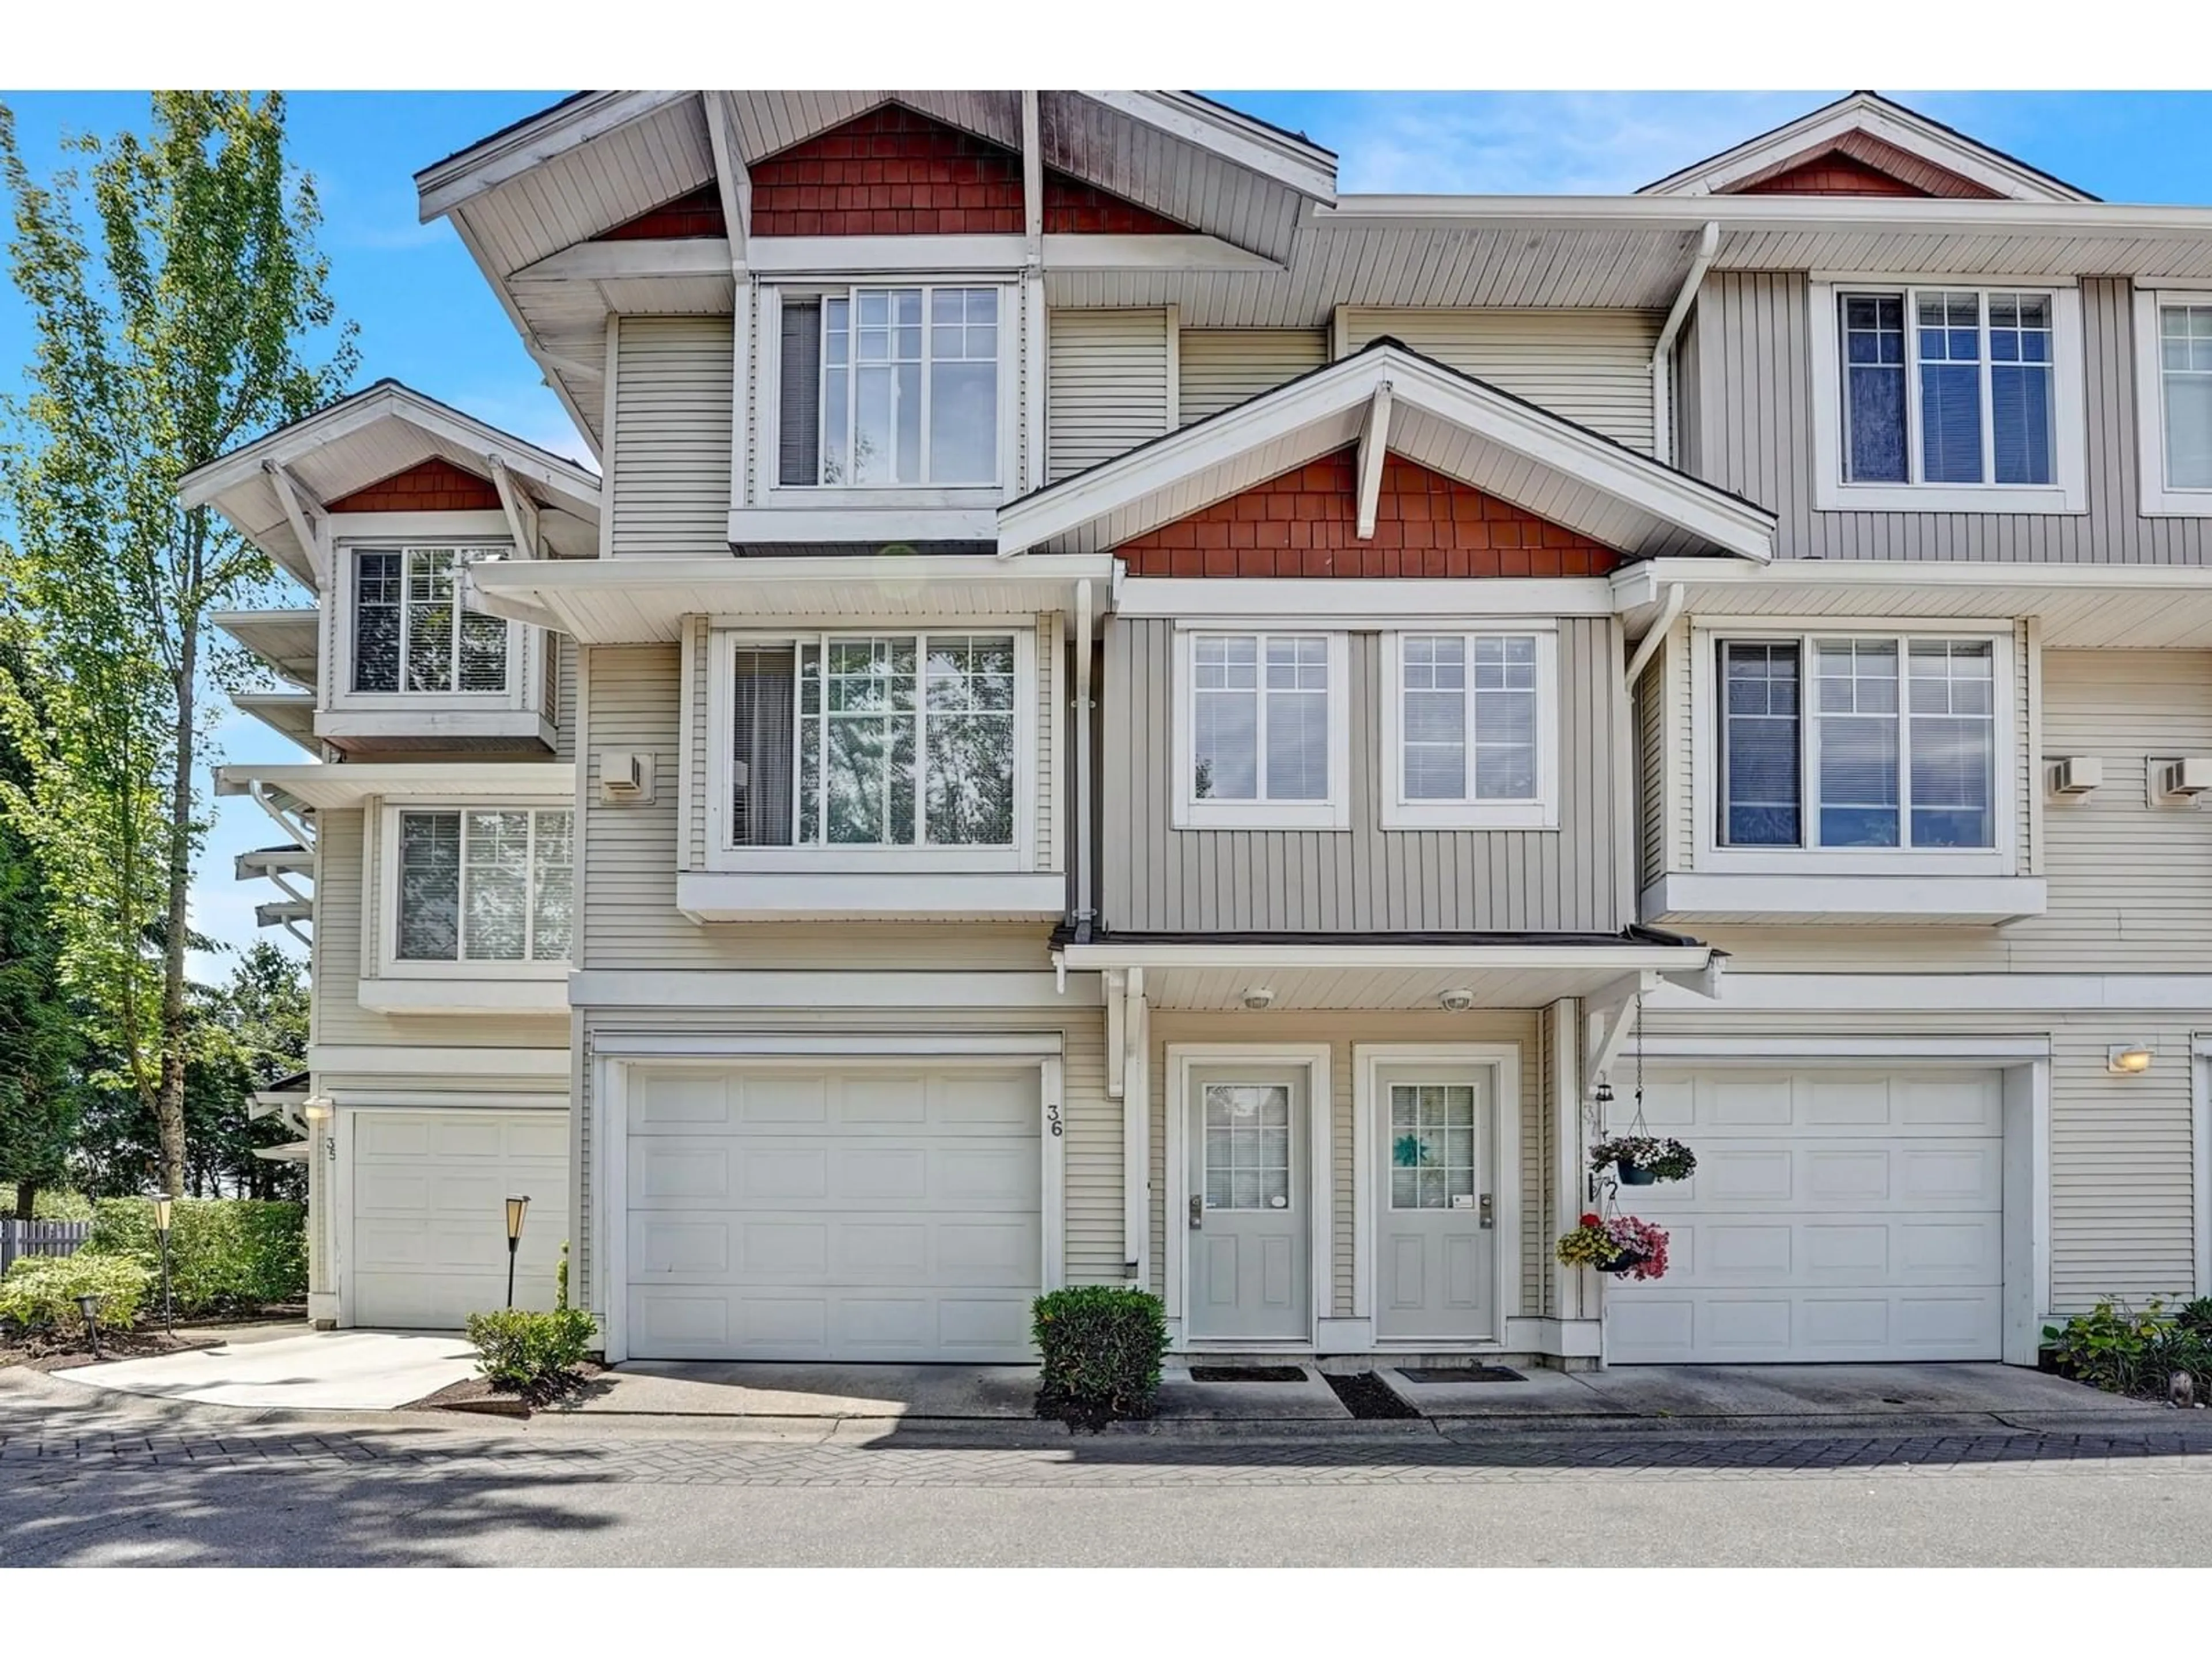 A pic from exterior of the house or condo for 36 12110 75A AVENUE, Surrey British Columbia V3W1M1